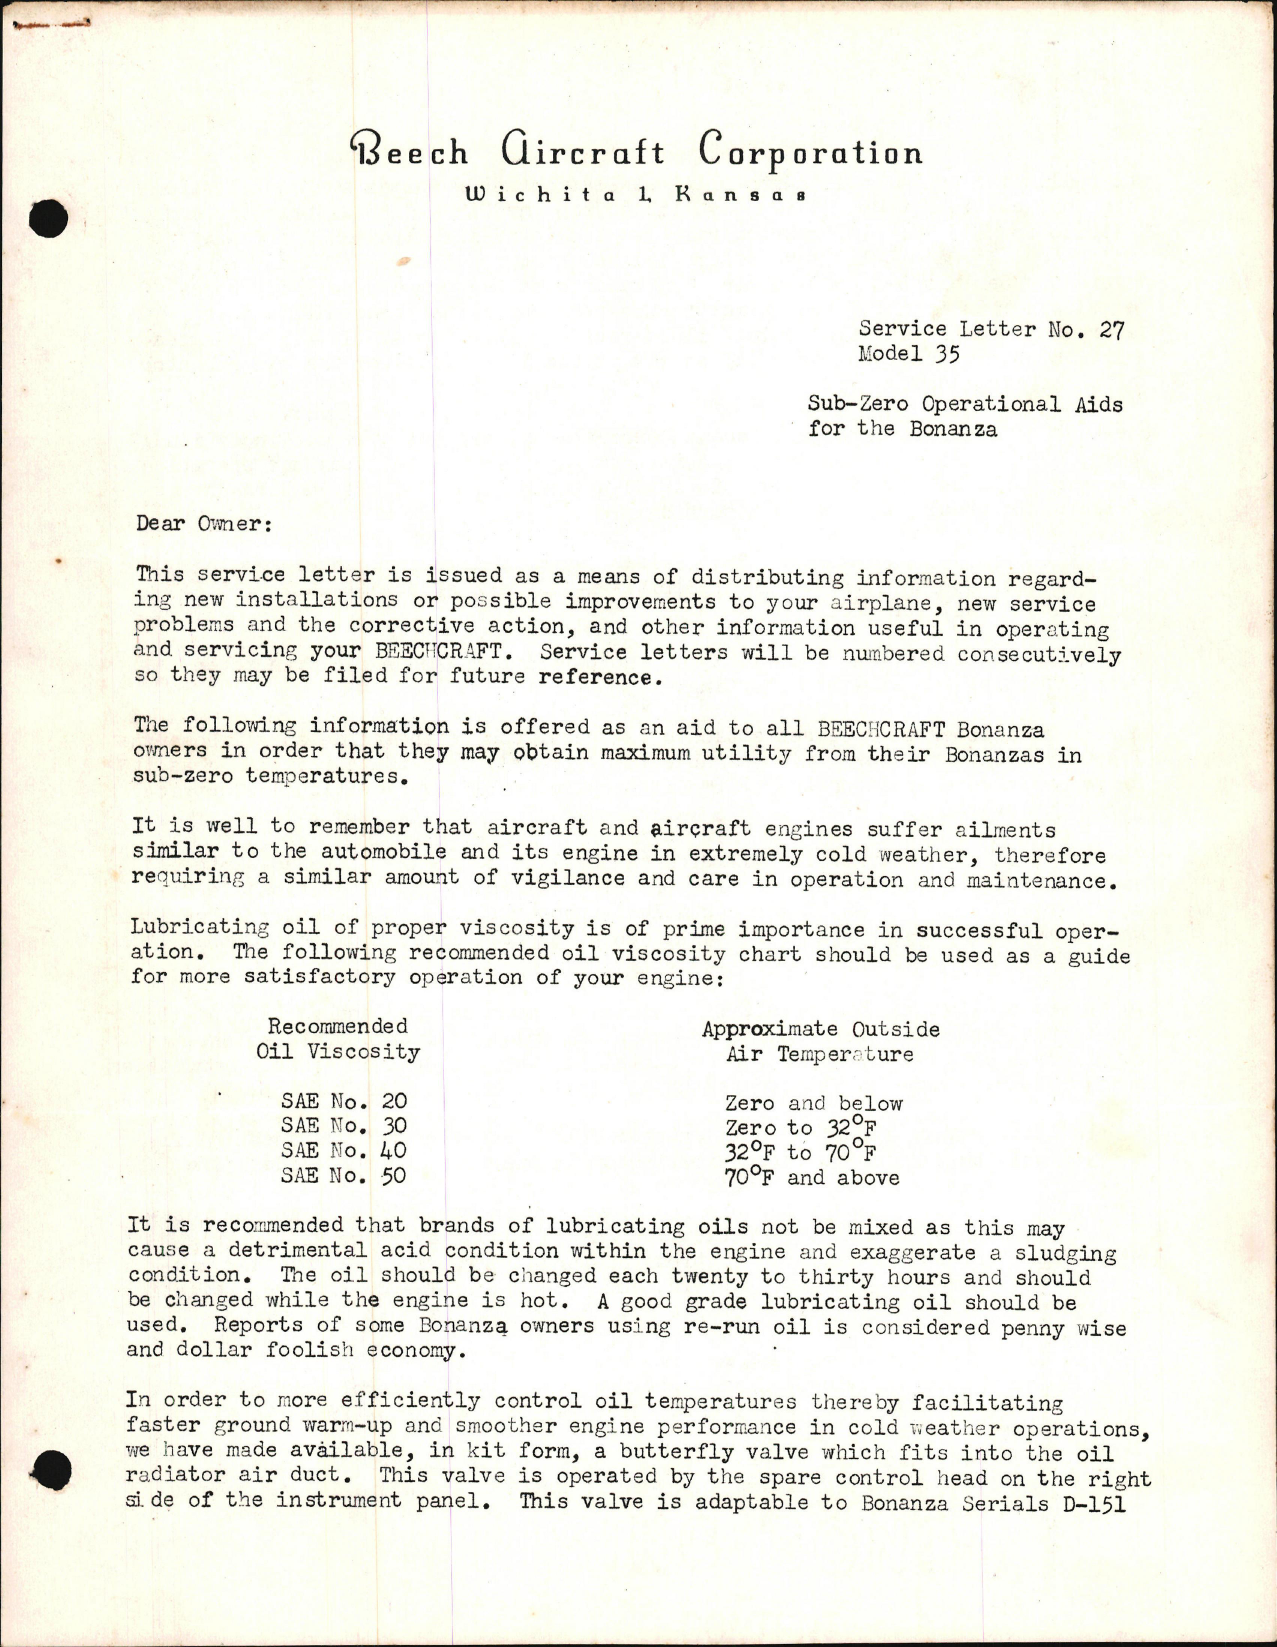 Sample page 1 from AirCorps Library document: Sub-Zero Operational Aids for the Bonanza